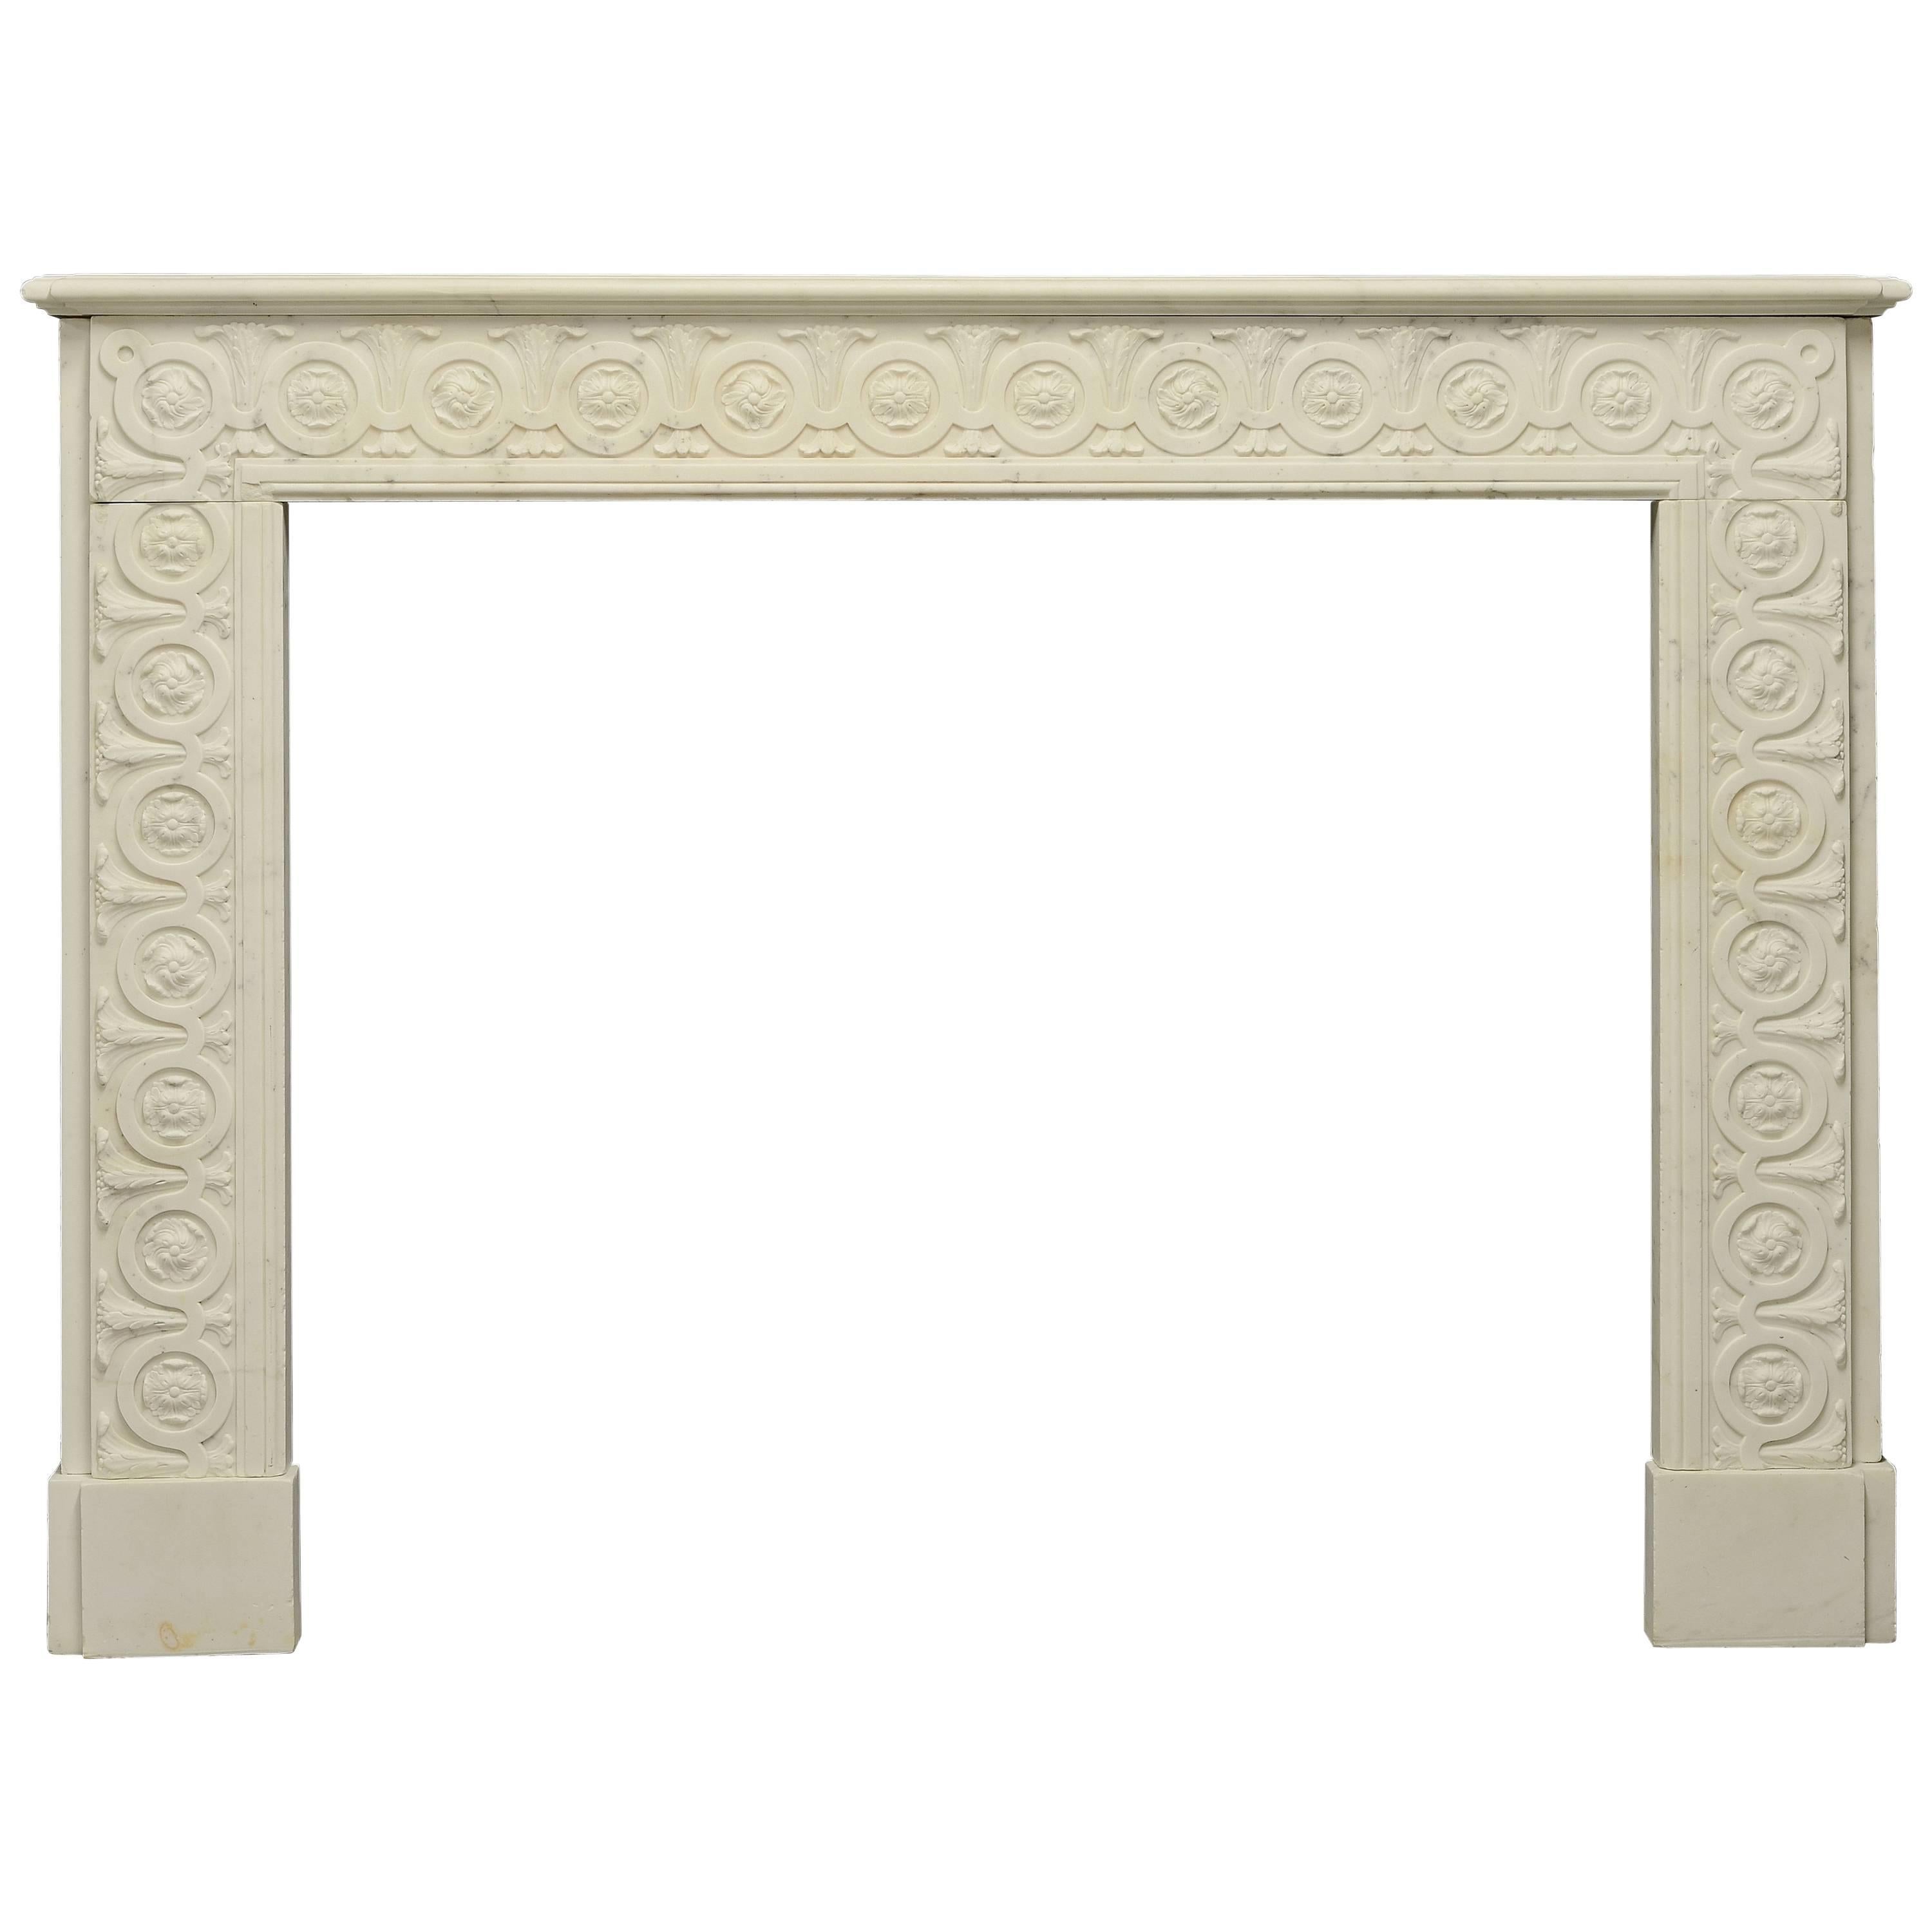 Amazing, White Marble Fireplace with Floral Guilloche Pattern Throughout